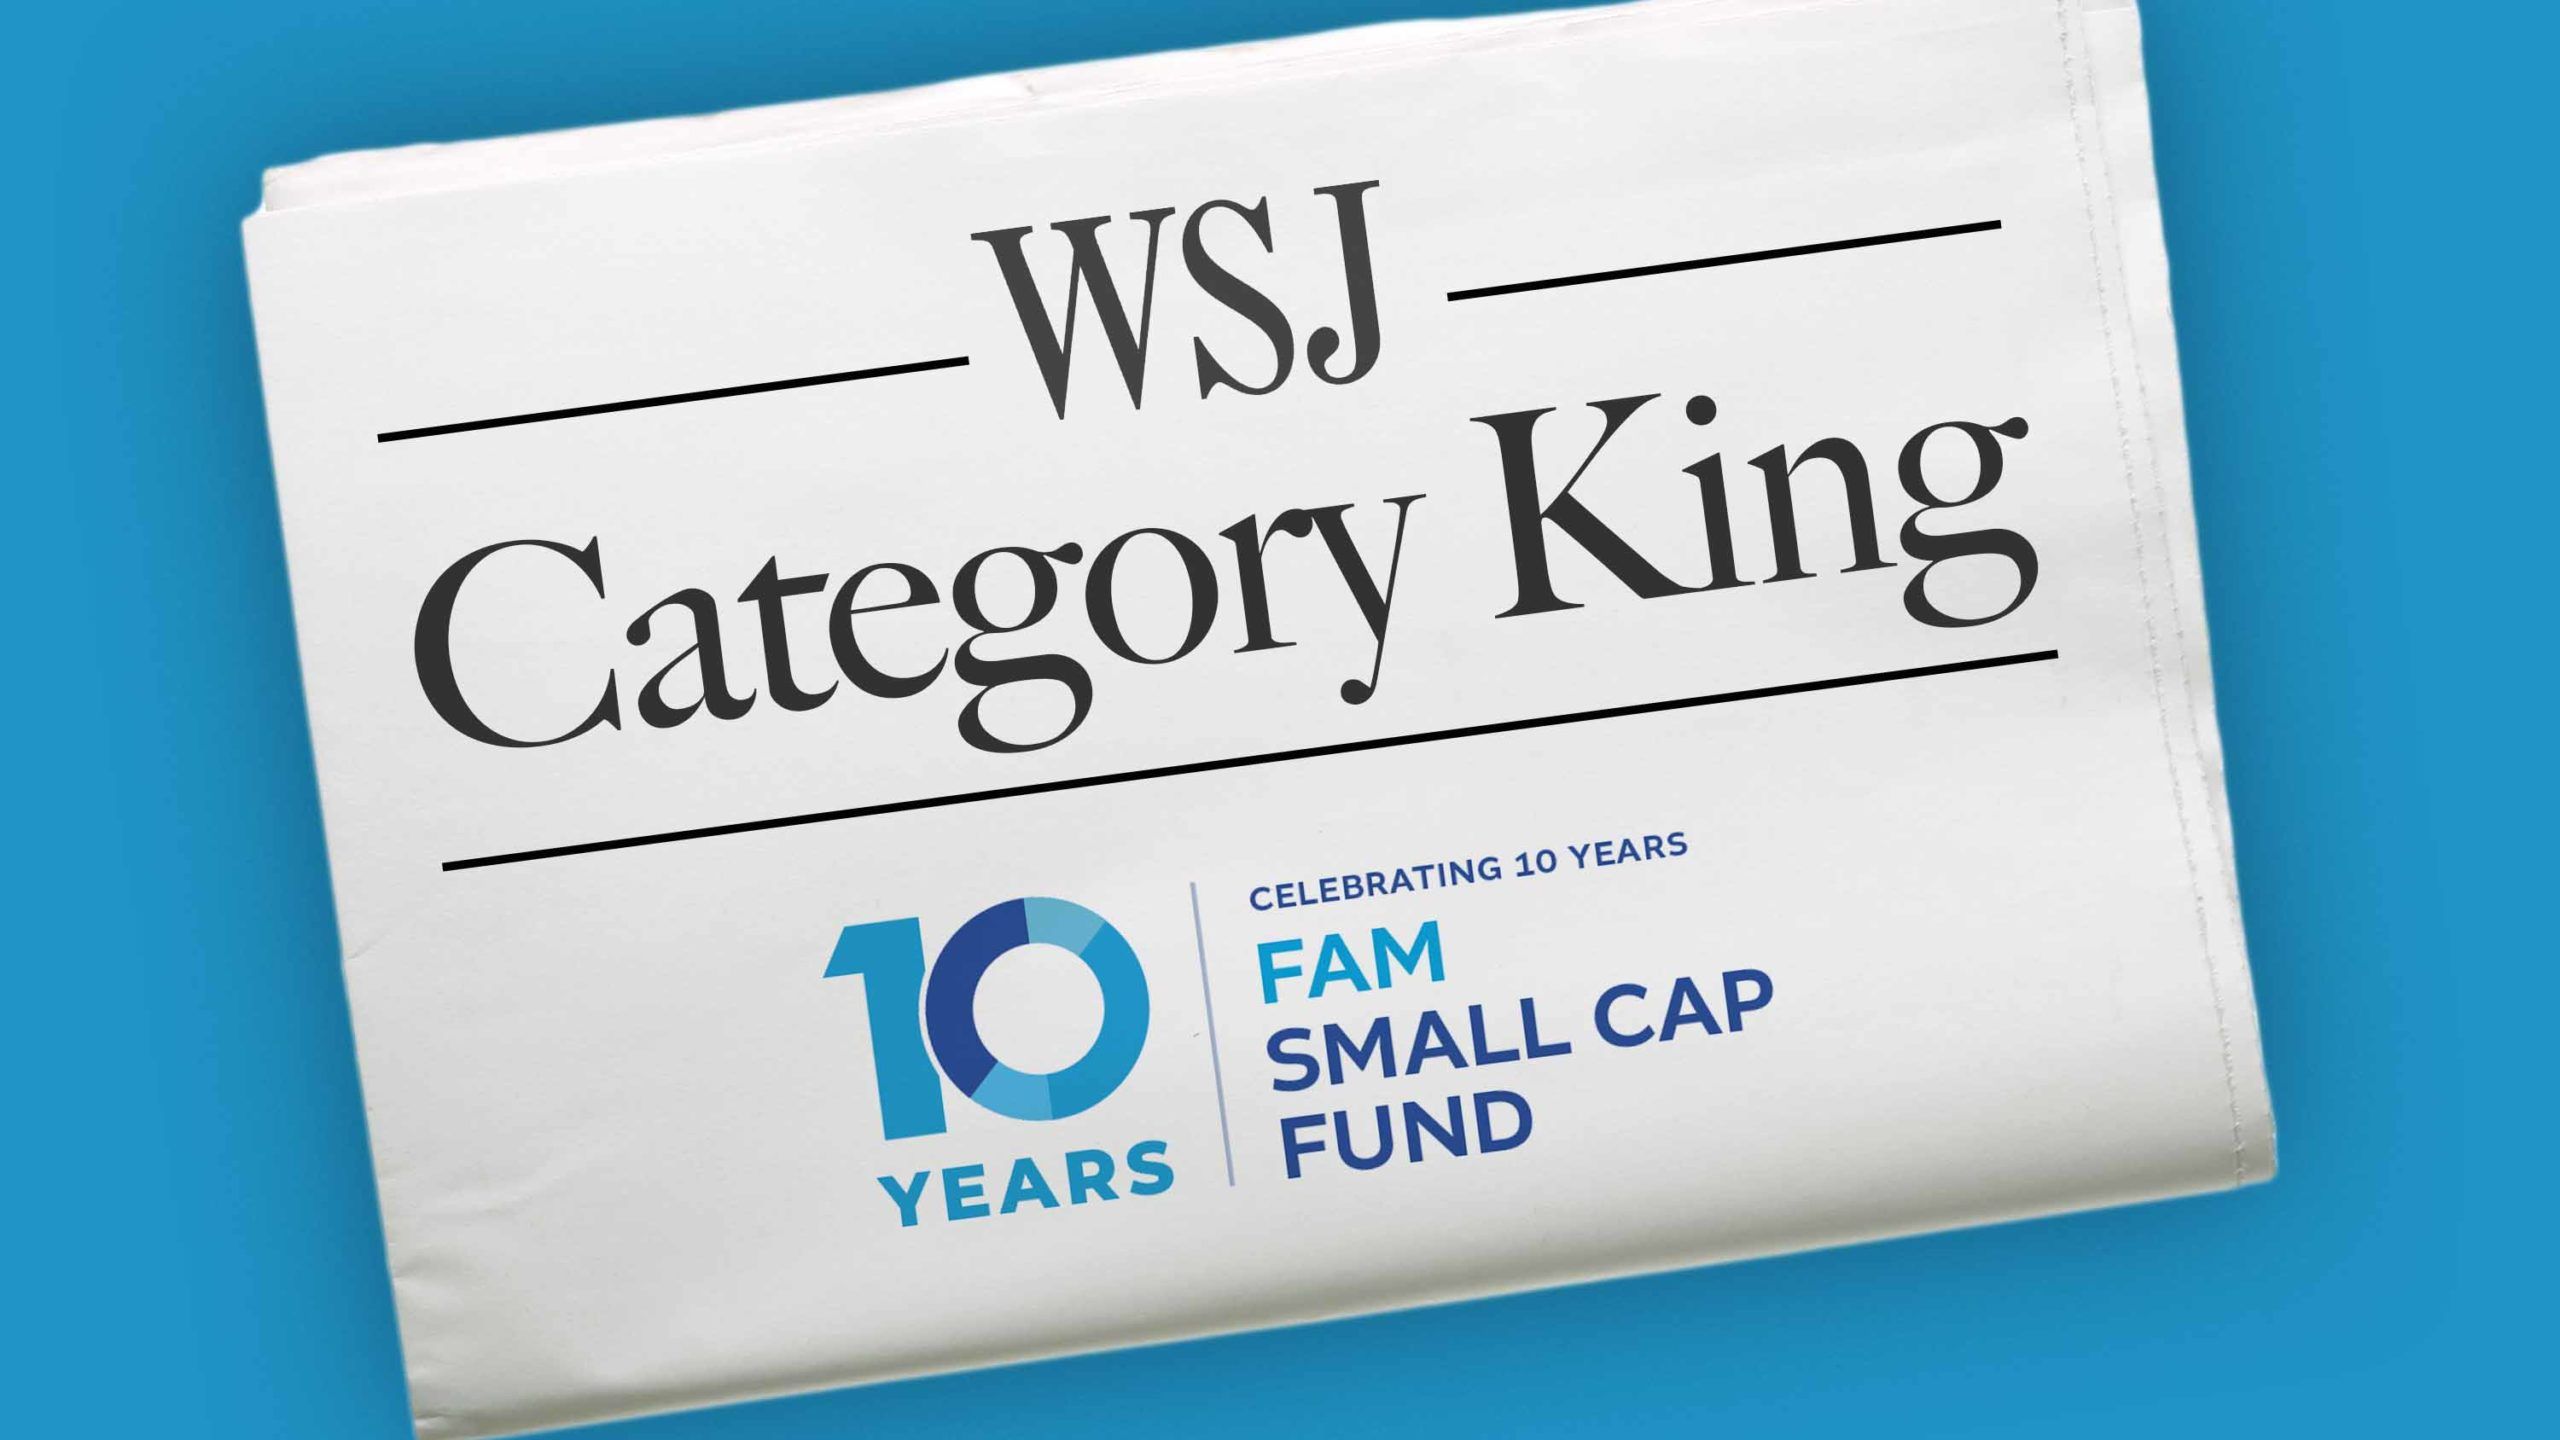 The Wall Street Journal Category King